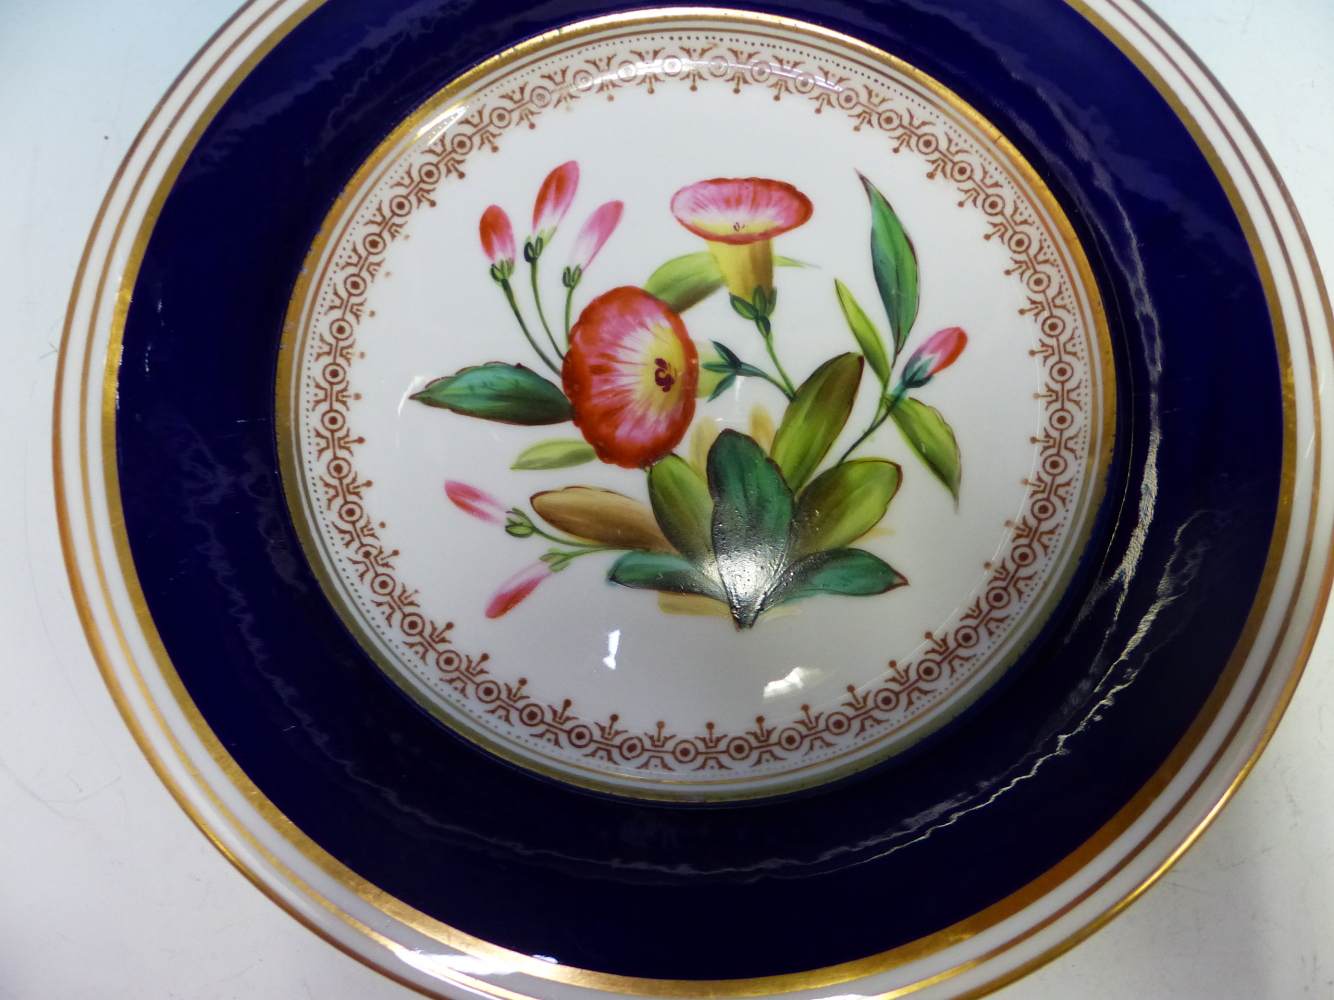 A LATE 19th C. ENGLISH PORCELAIN DESSERT SERVICE, EACH PIECE PRINTED AND PAINTED WITH FLOWERS WITHIN - Image 16 of 18